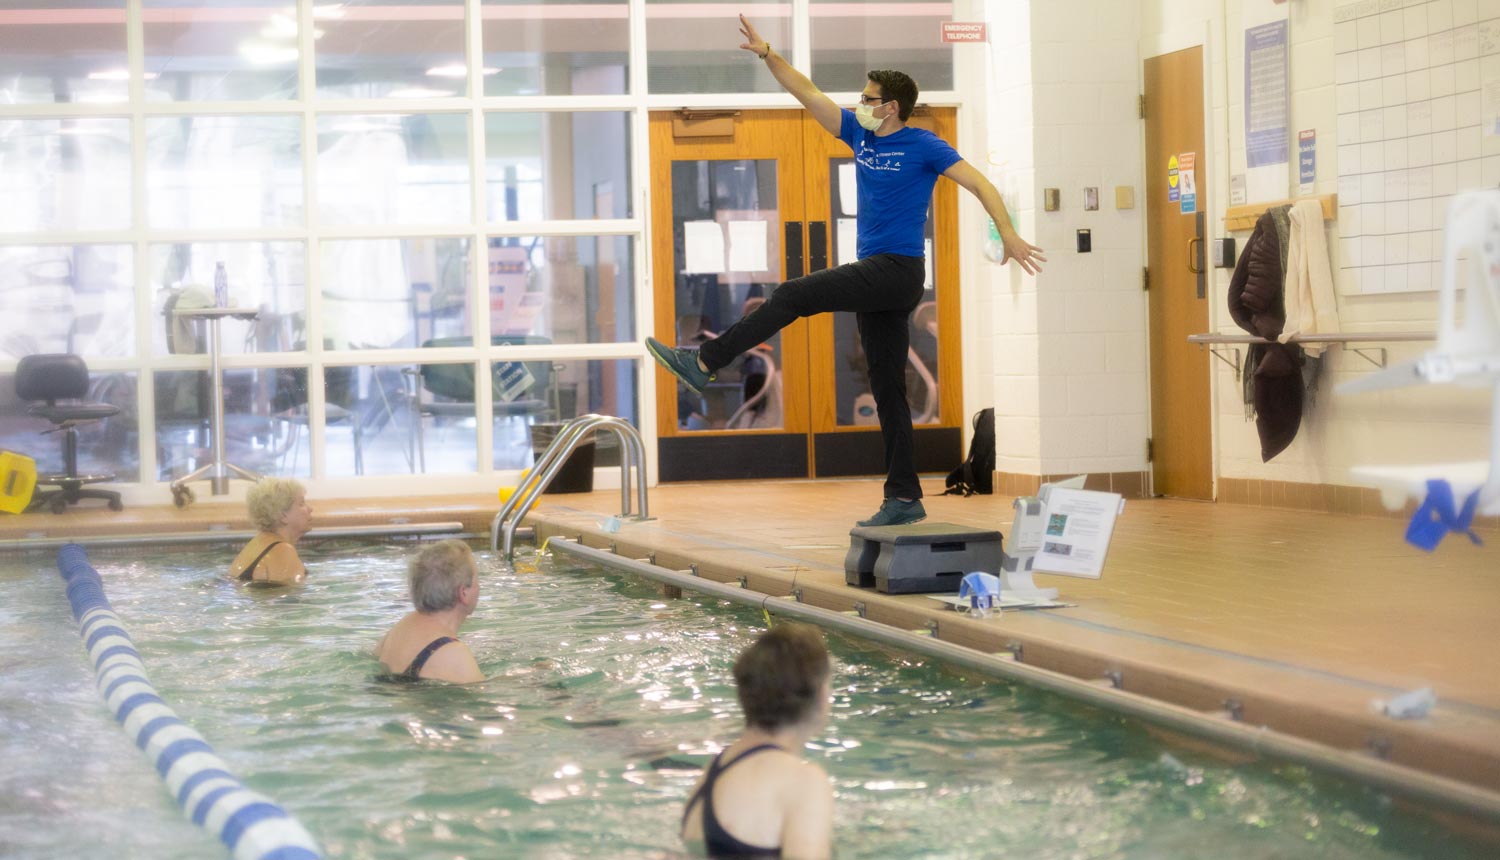 A water exercise class in a pool at the Duke Health &amp; Fitness Center.